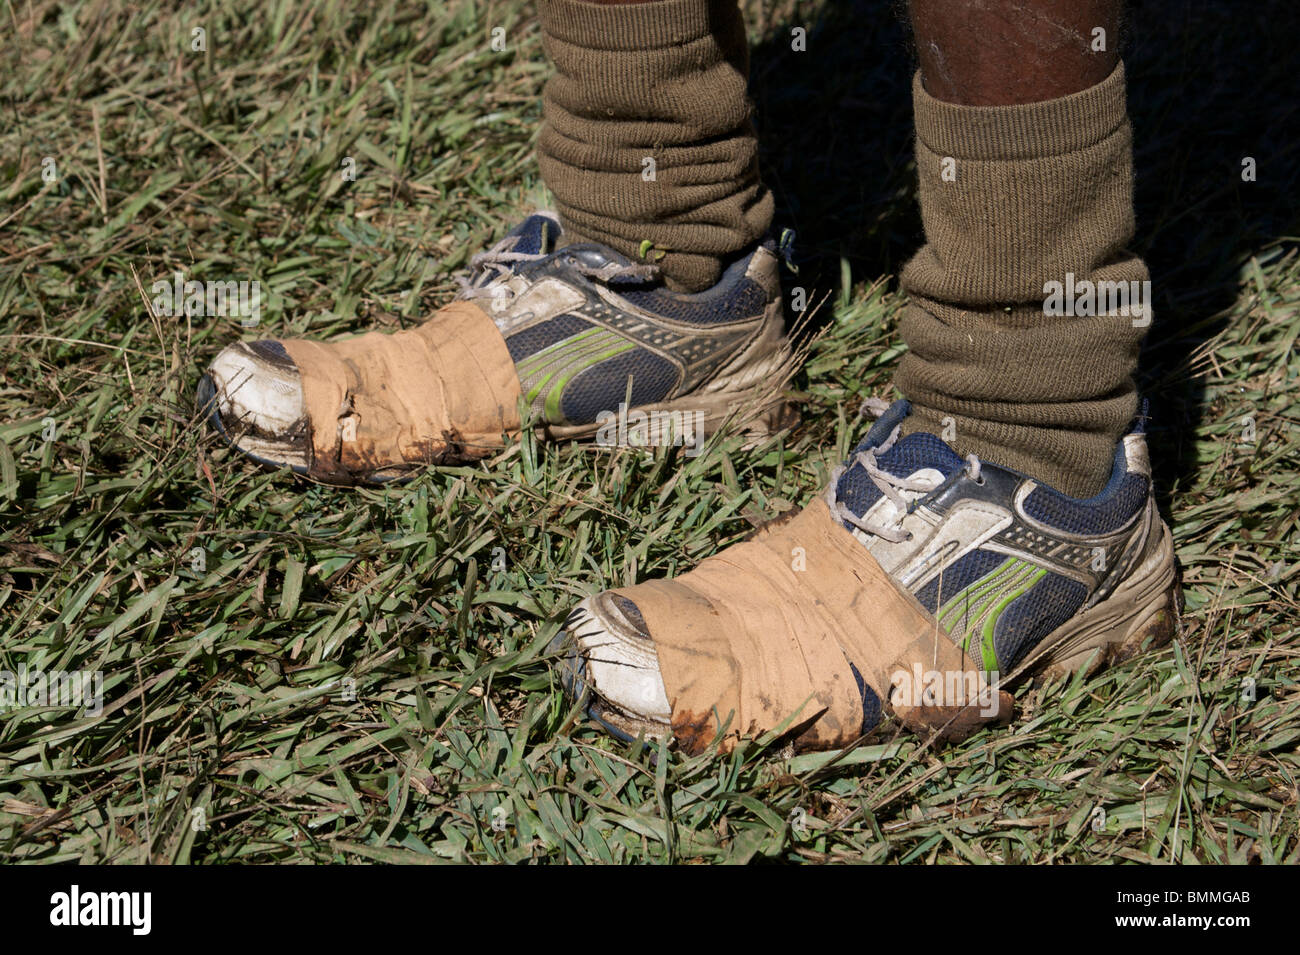 Tramp Shoes High Resolution Stock Photography and Images - Alamy